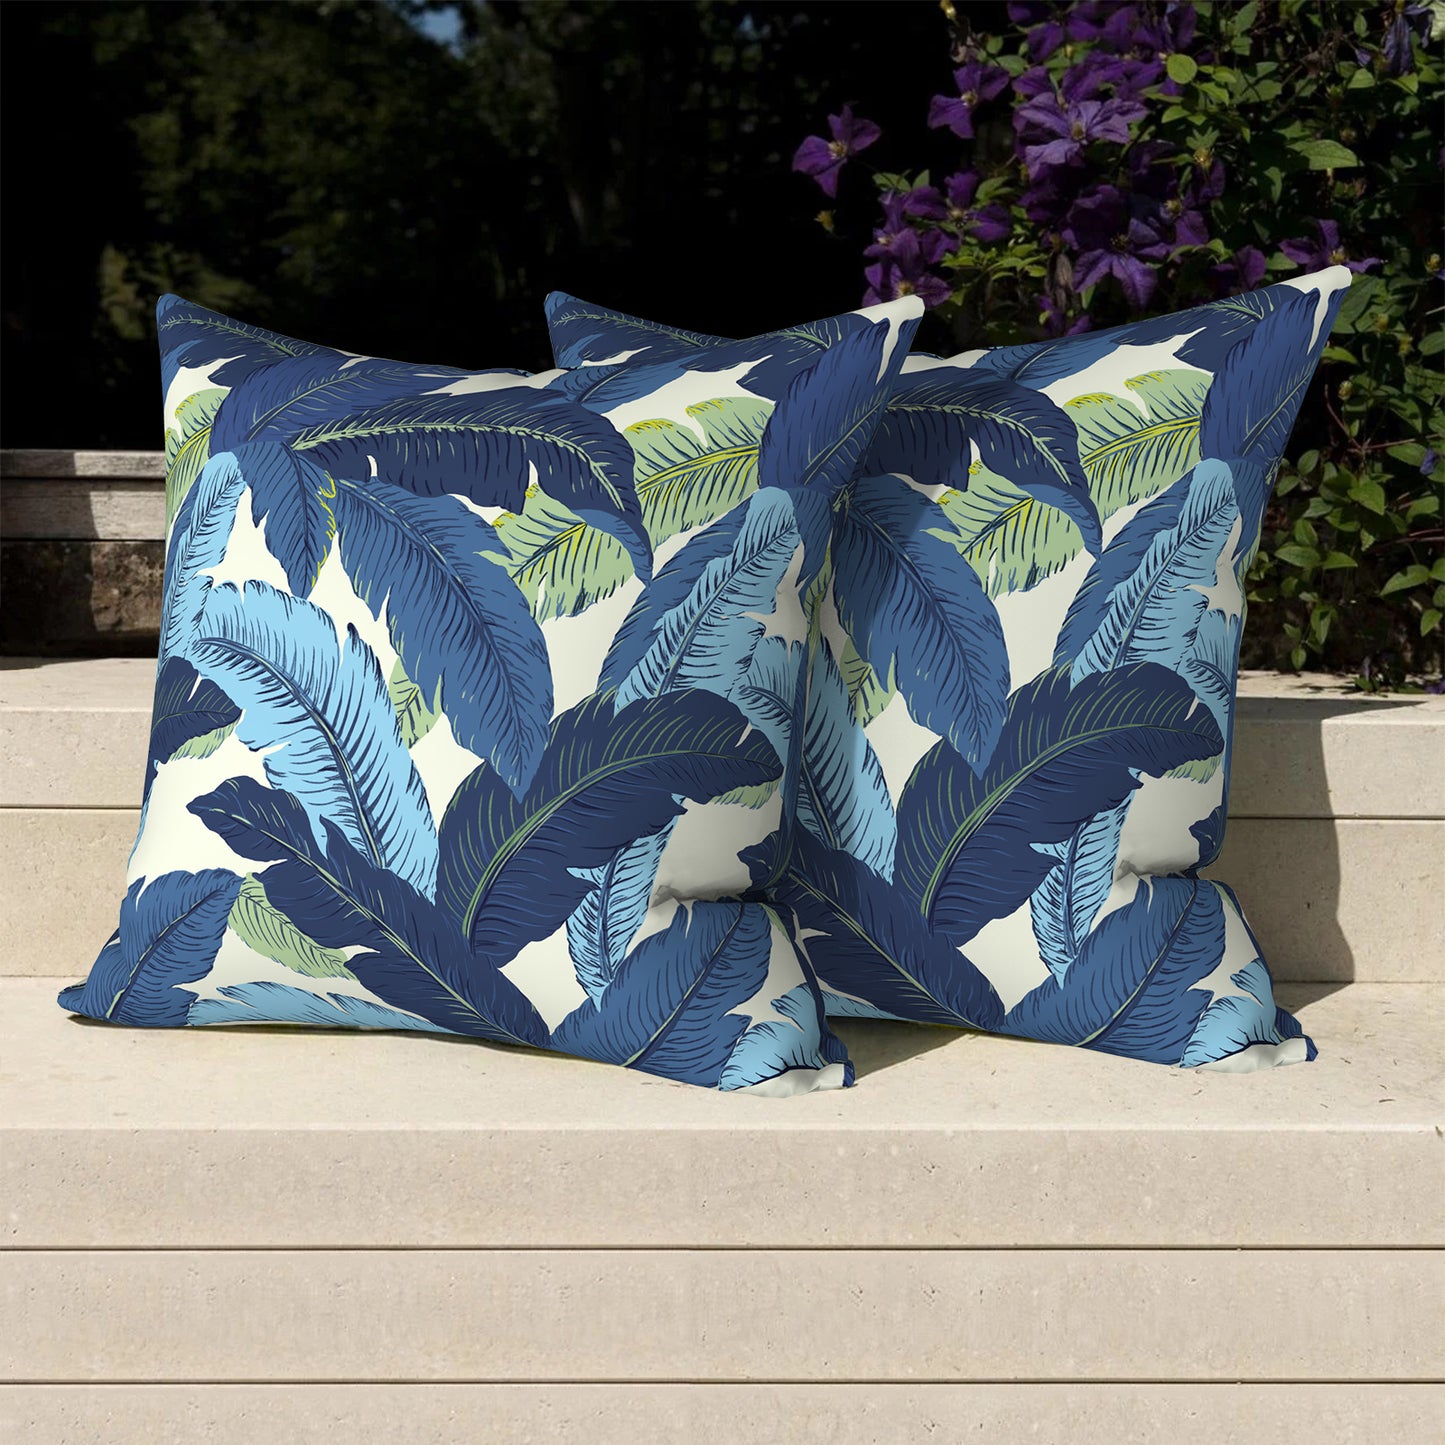 Melody Elephant Outdoor Throw Pillows with Inners, All Weather patio pillows set of 2, Square pillows Decorative for  home garden furniture, 20x20 Inch, Swaying Palms Blue